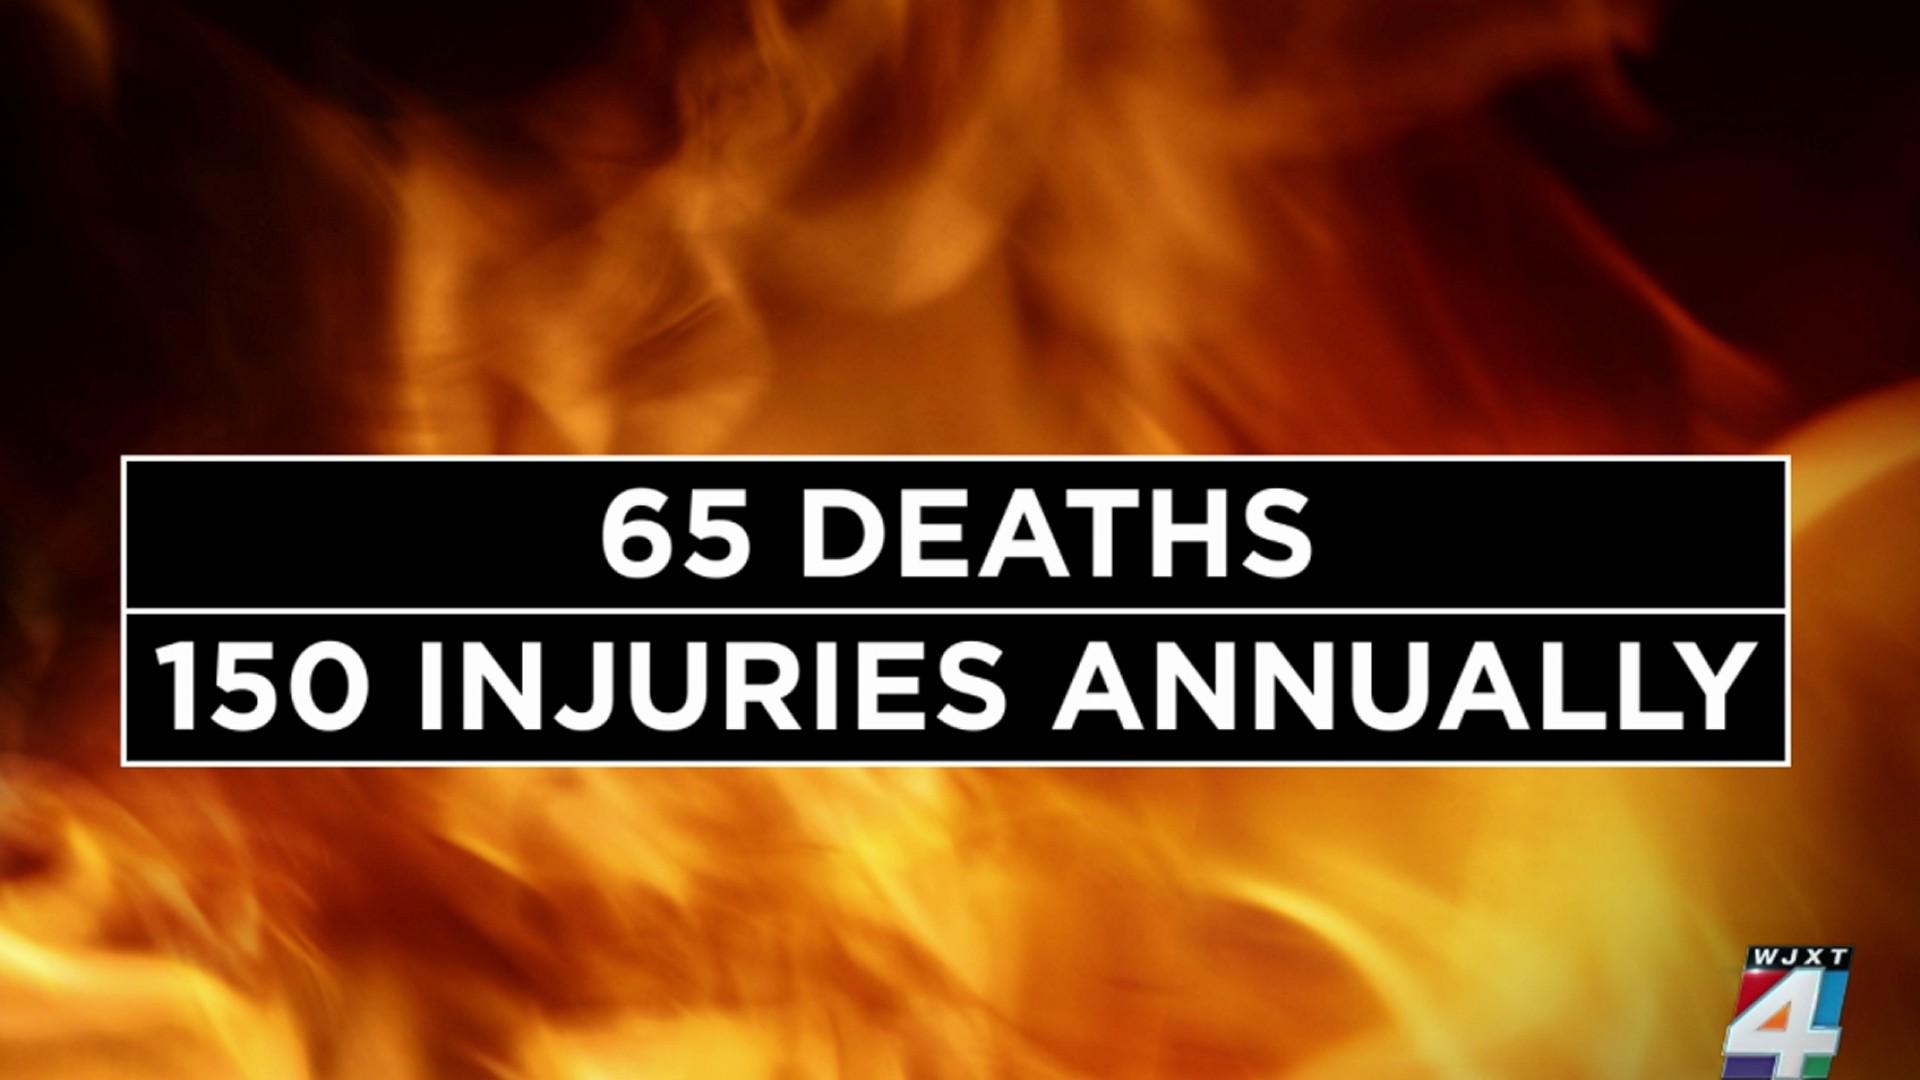 Space heaters cause majority of fatal house fires, 2018-01-16